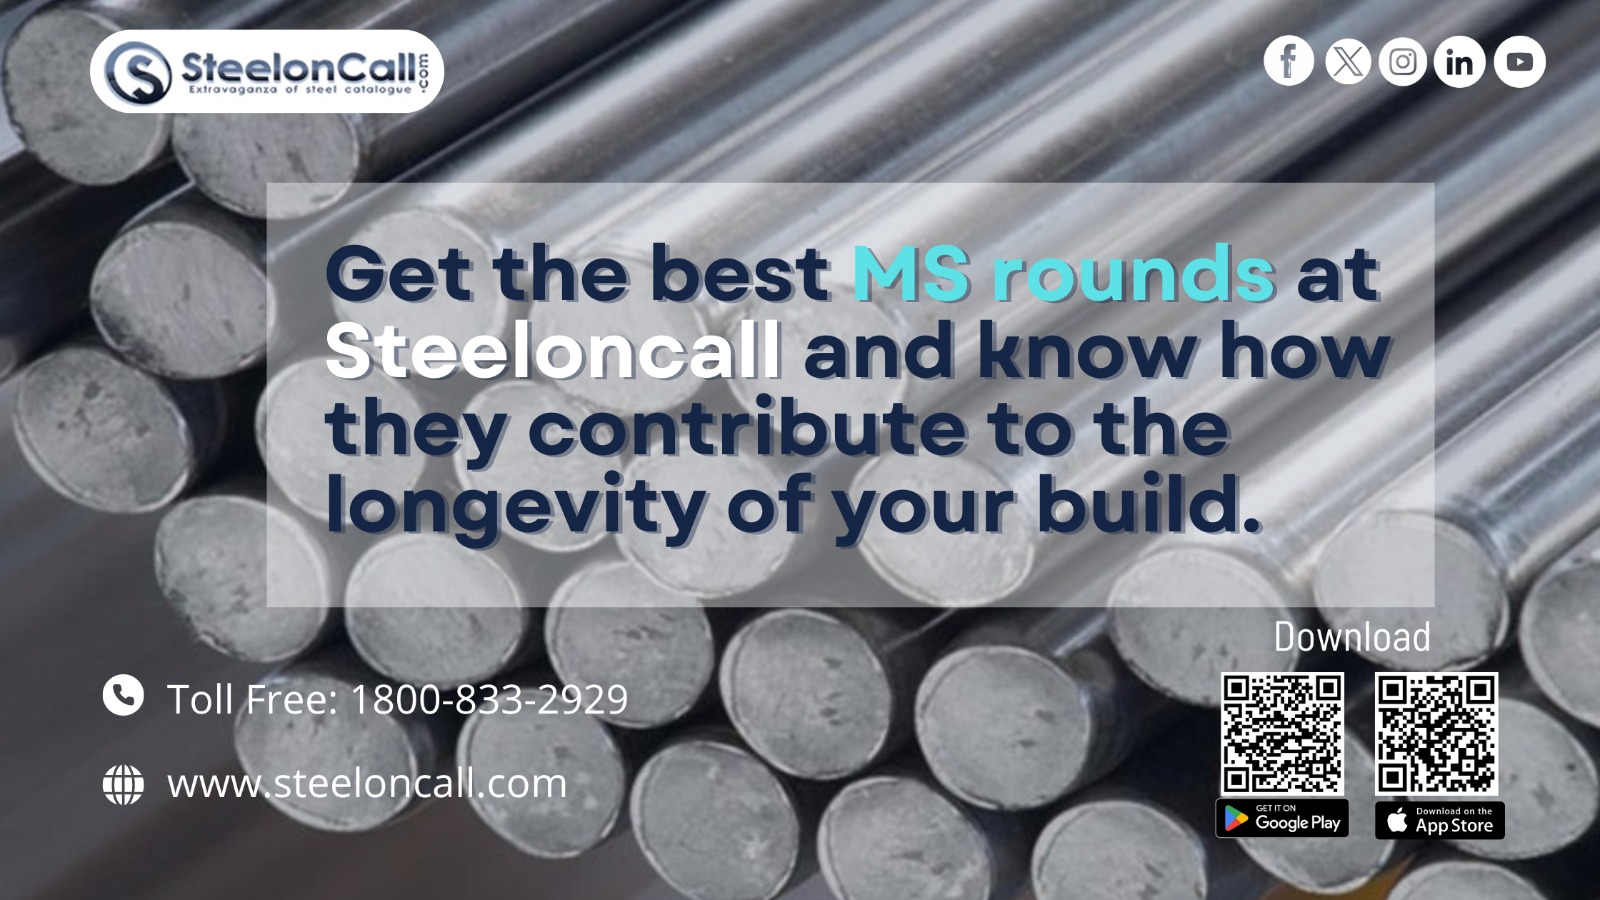 Get the Best MS Rounds at Steeloncall and Know How They Contribute to the Longevity of Your Build